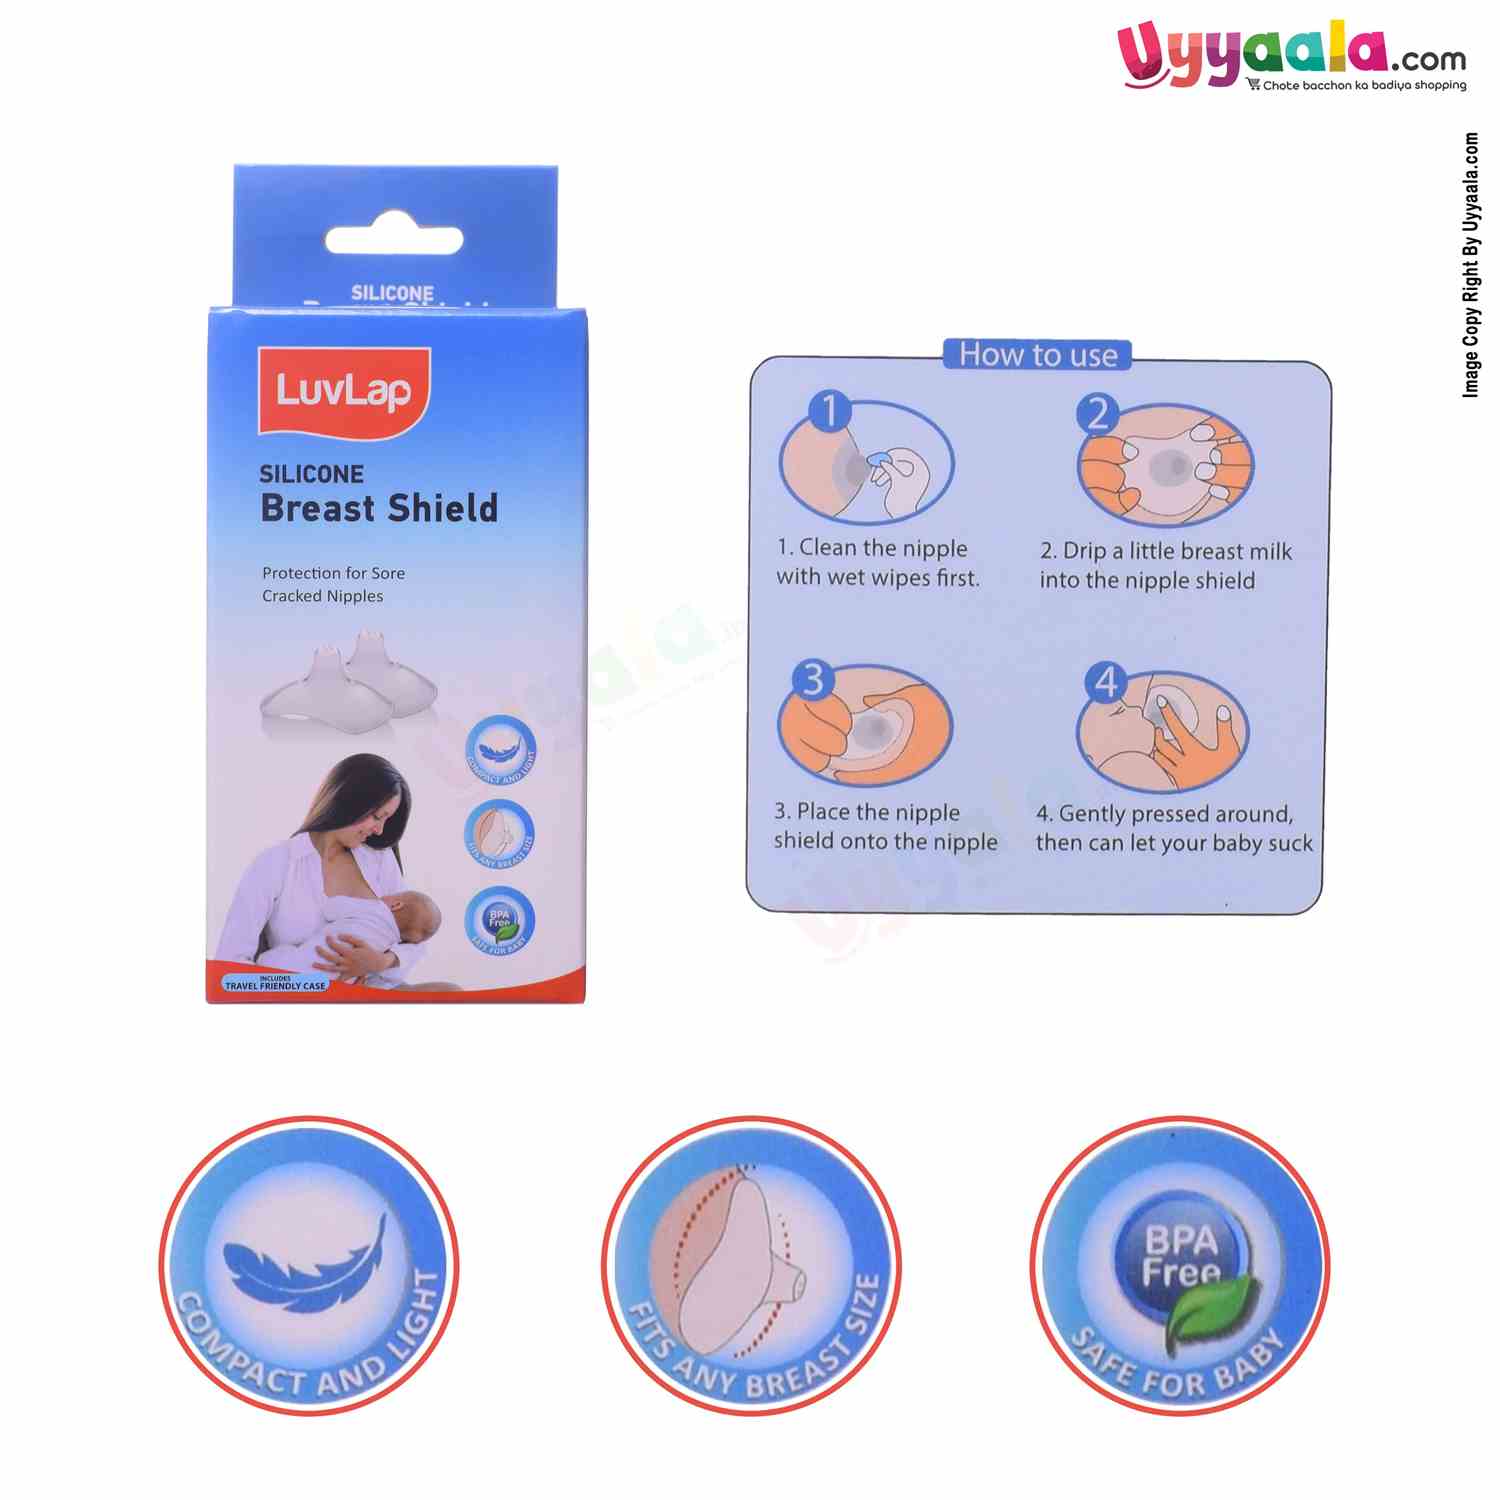 LUVLAP Silicone Breast Shields